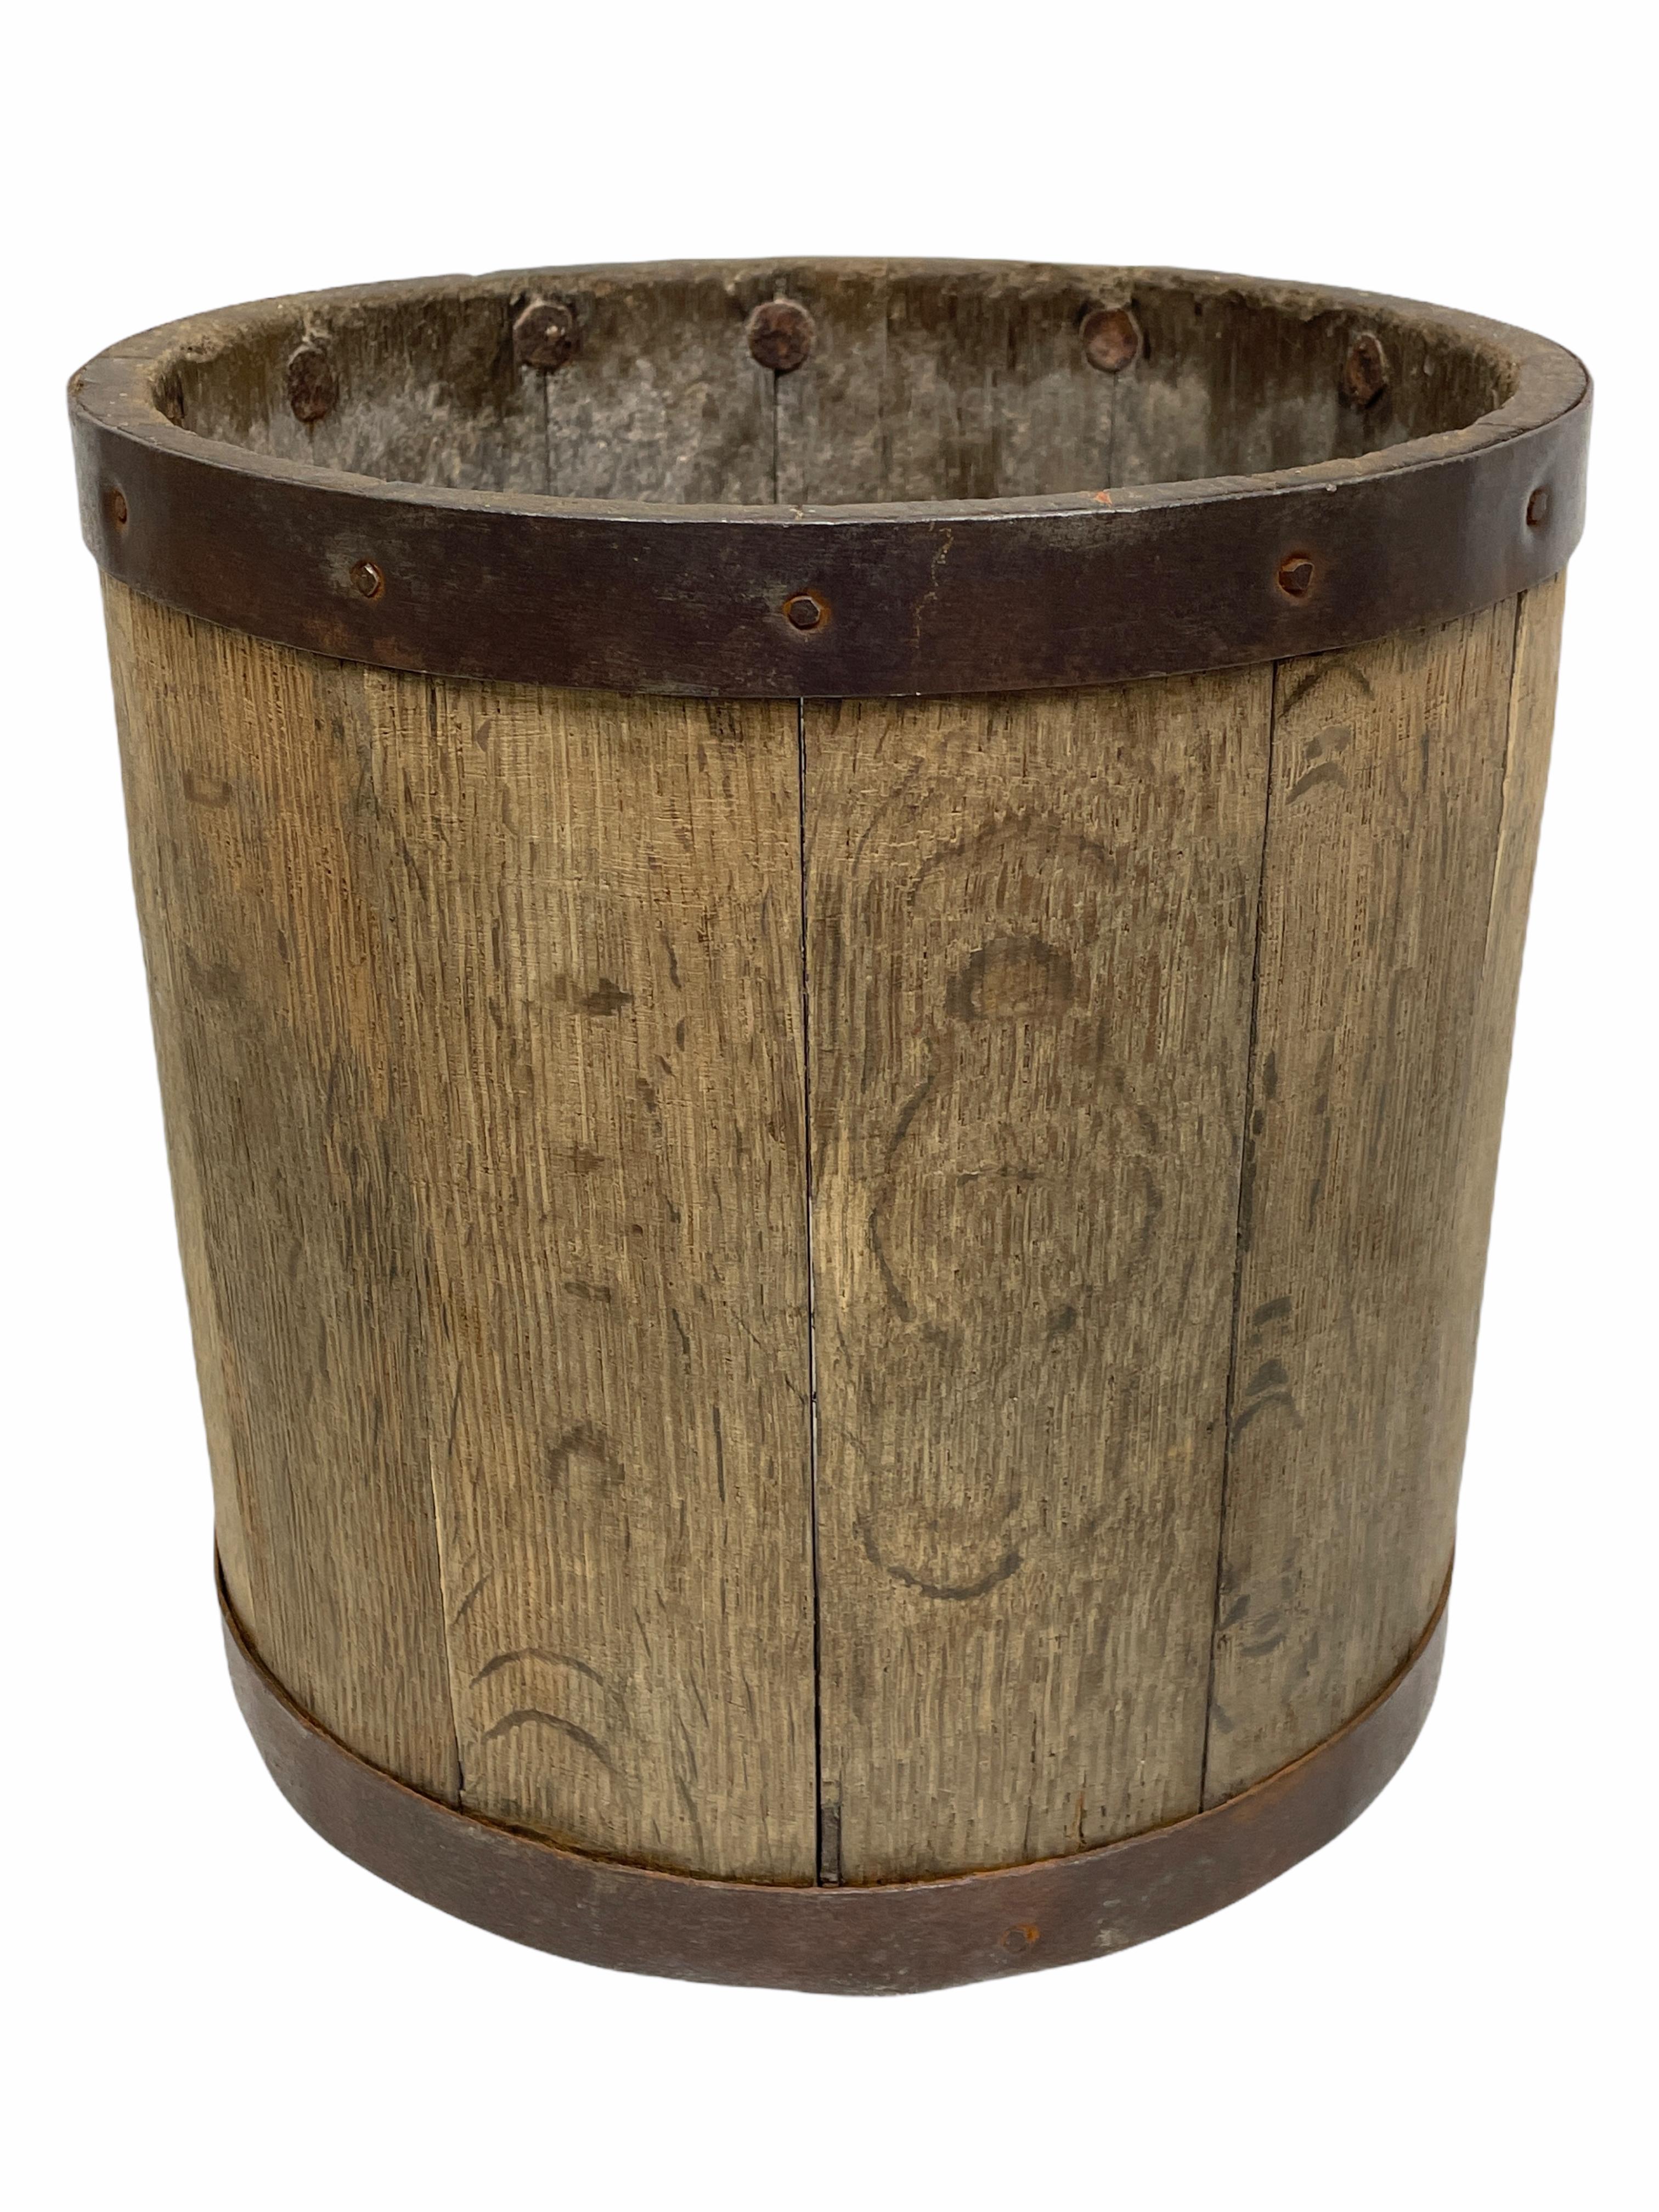 Austrian Wood Water Bucket with Wrought Iron Bands, Austria, 1890s